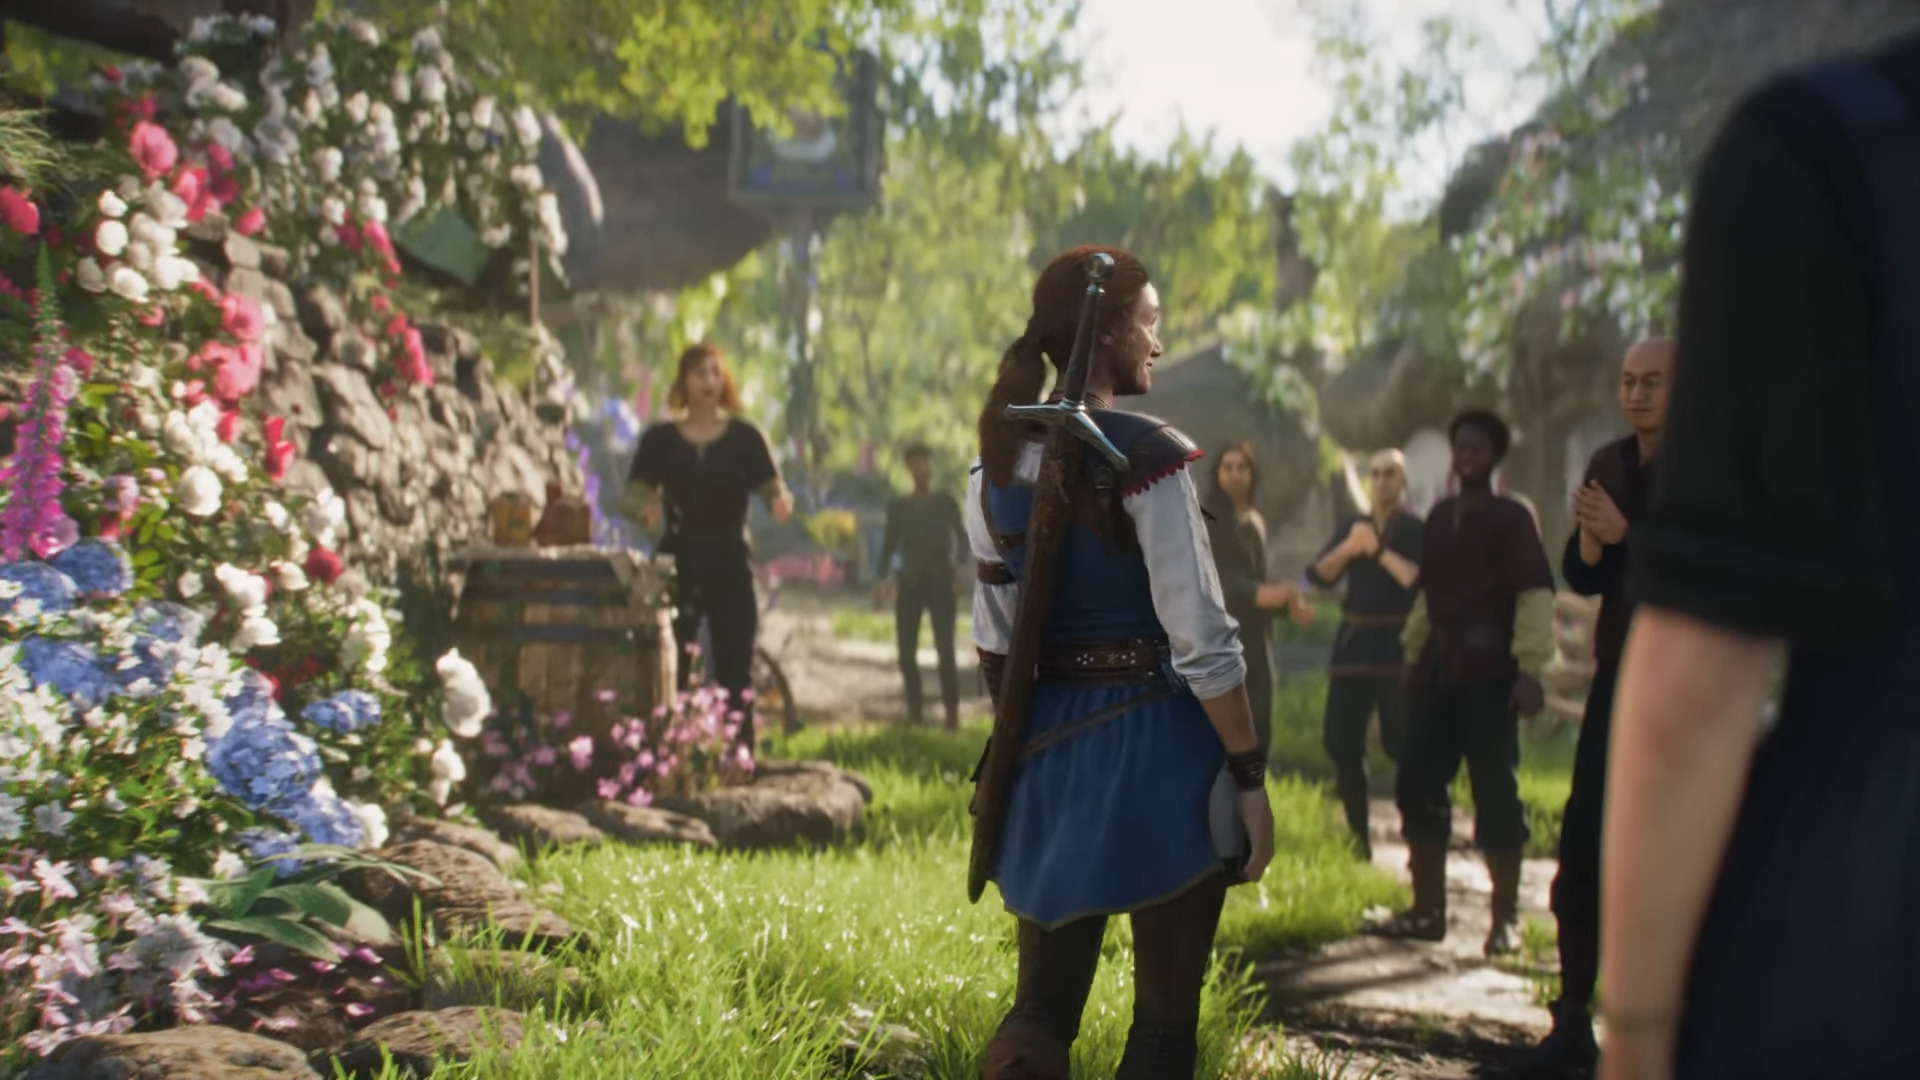 Fable reboot gets comedic trailer involving heroes and giants | TechRadar